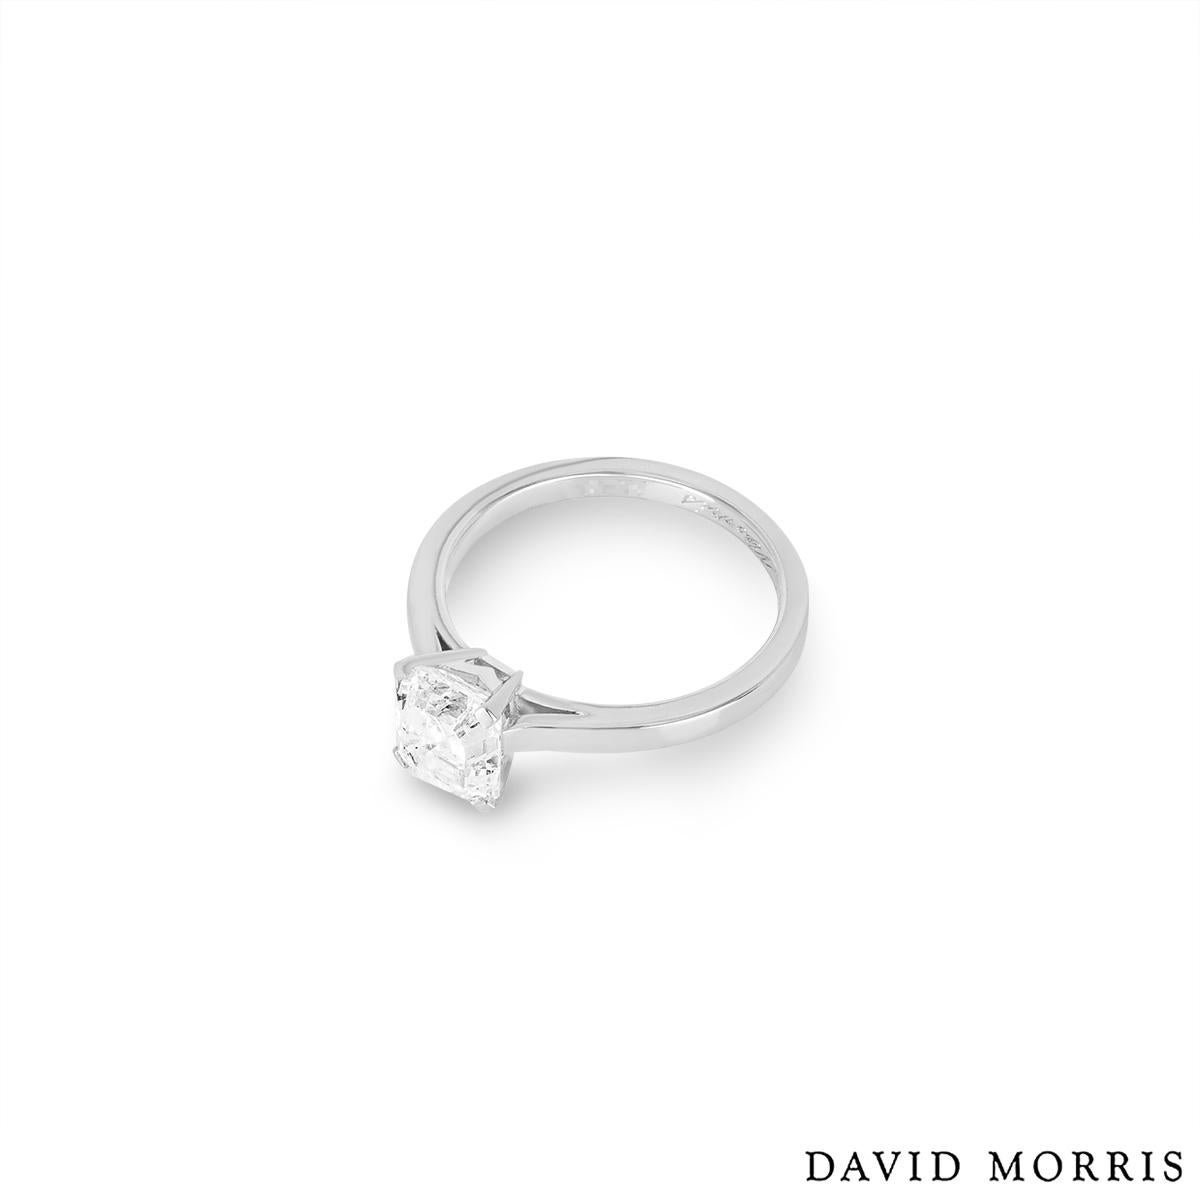 David Morris Platinum Emerald Cut Engagement Solitaire Ring 1.73ct D/VS2 GIA In Excellent Condition For Sale In London, GB